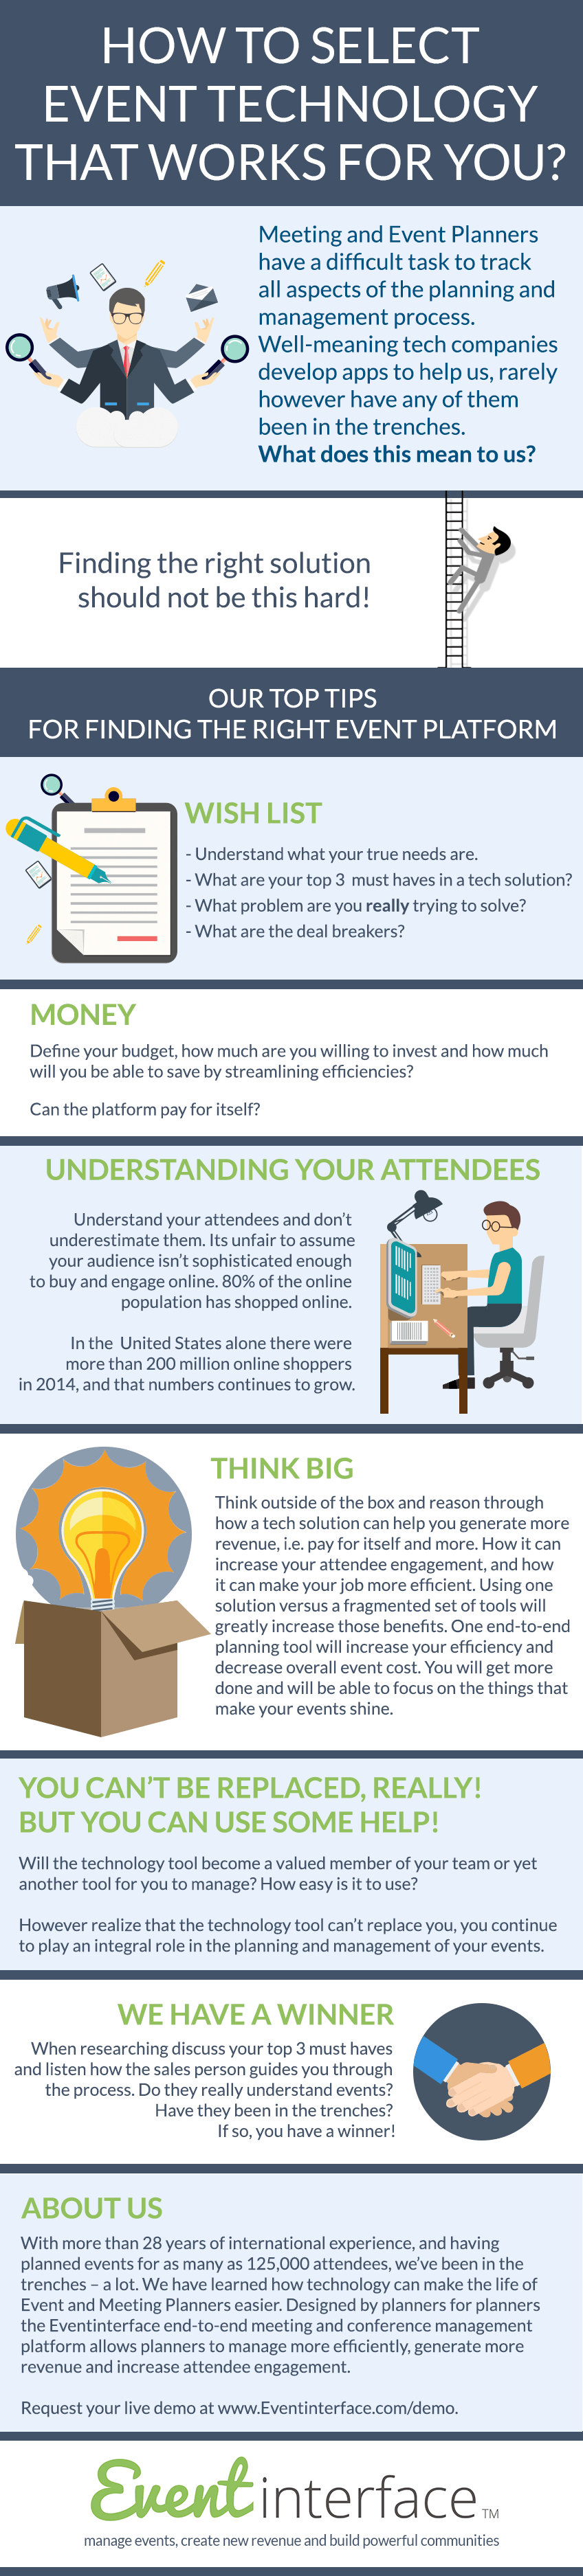 How to Select Event Technology that Works for You Infographic